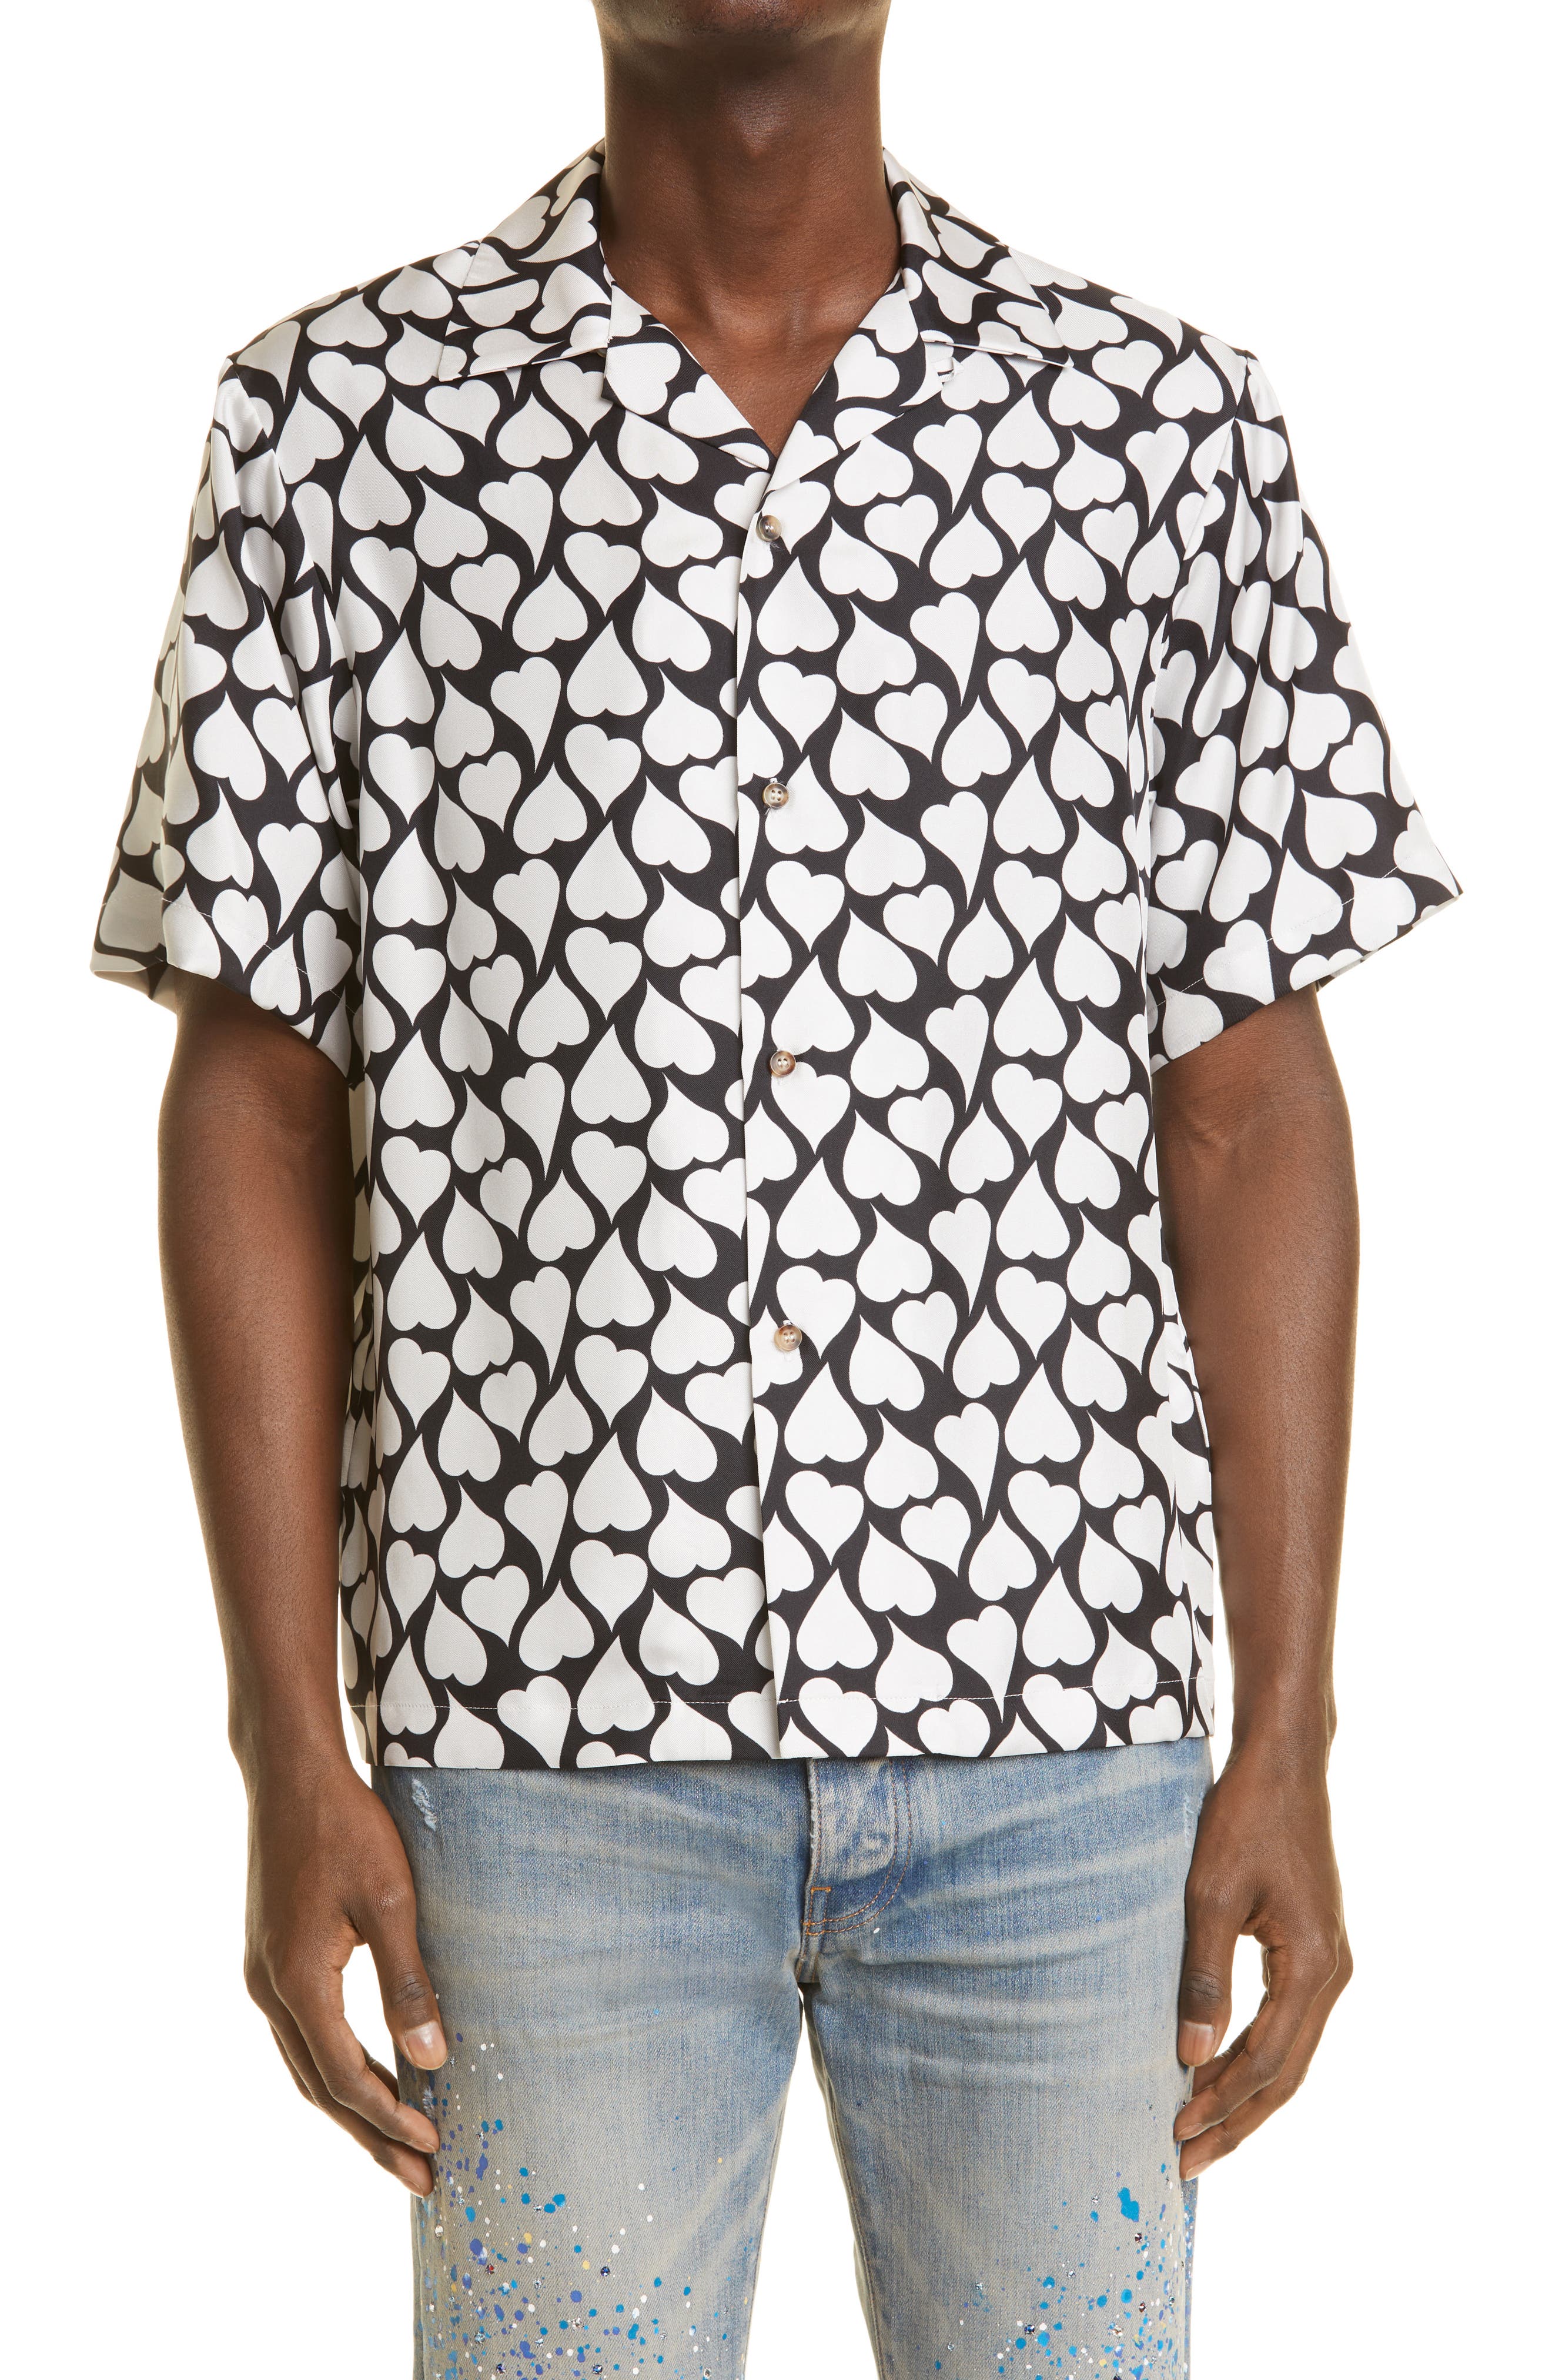 AMIRI Love Hearts Short Sleeve Silk Twill Button-Up Bowling Shirt in Black/Alabaster at Nordstrom, Size Small